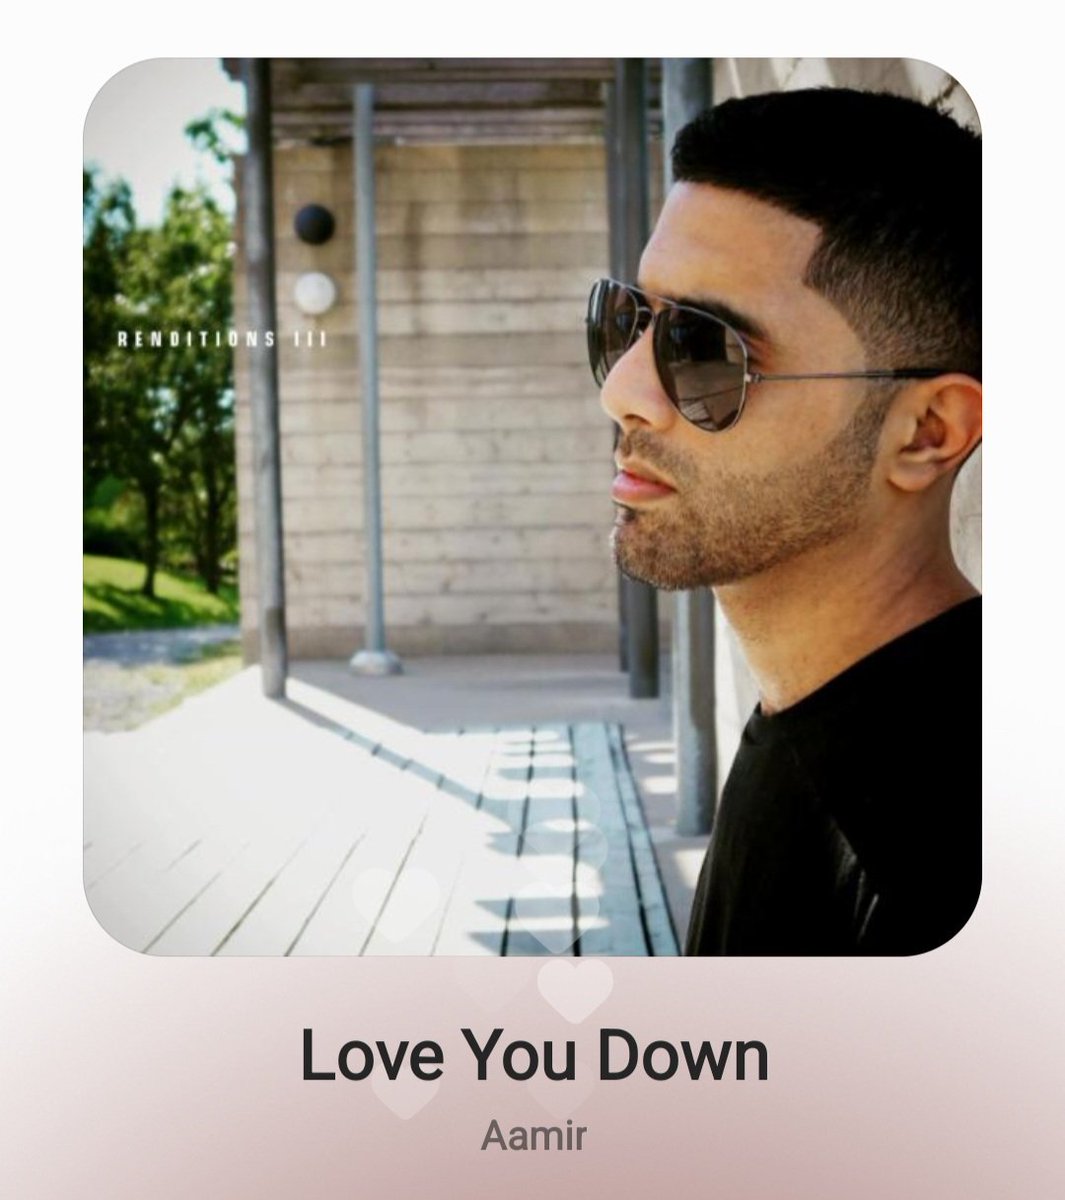 Aamir - Love You Down (Ready For The World Cover)

One of my favorite songs, my take on 'Love You Down' - an #RnB classic

'Love You Down' - Originally by Ready For The World Produced/Mixed/Mastered by @aamirrnb
#loveyoudown #oldschoolrnb ⤵️🎙❤️‍🔥
youtu.be/-vsW28PQnX8